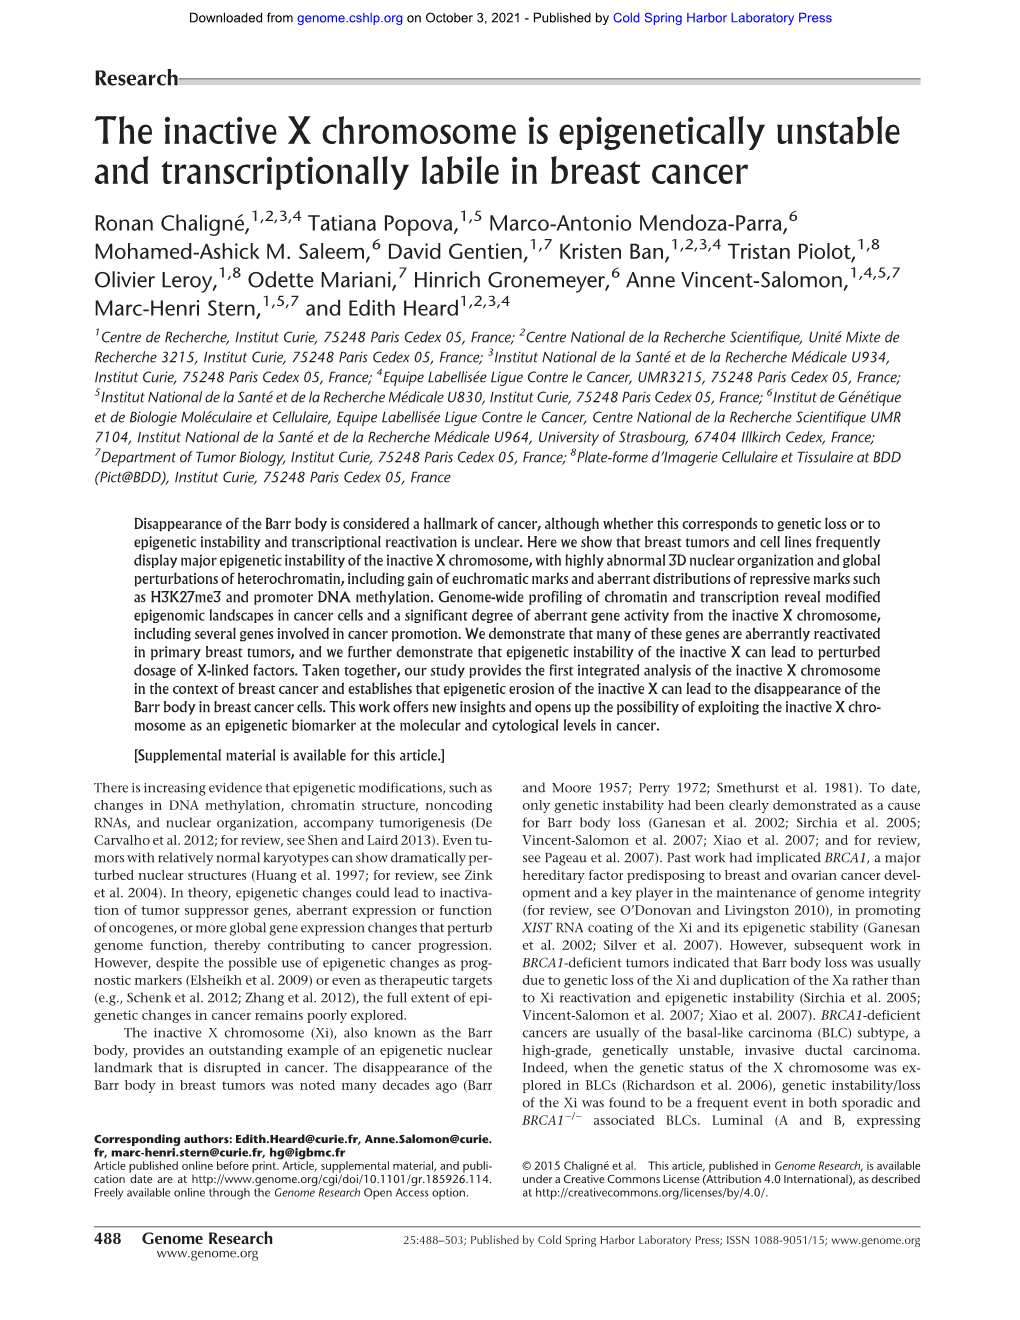 The Inactive X Chromosome Is Epigenetically Unstable and Transcriptionally Labile in Breast Cancer